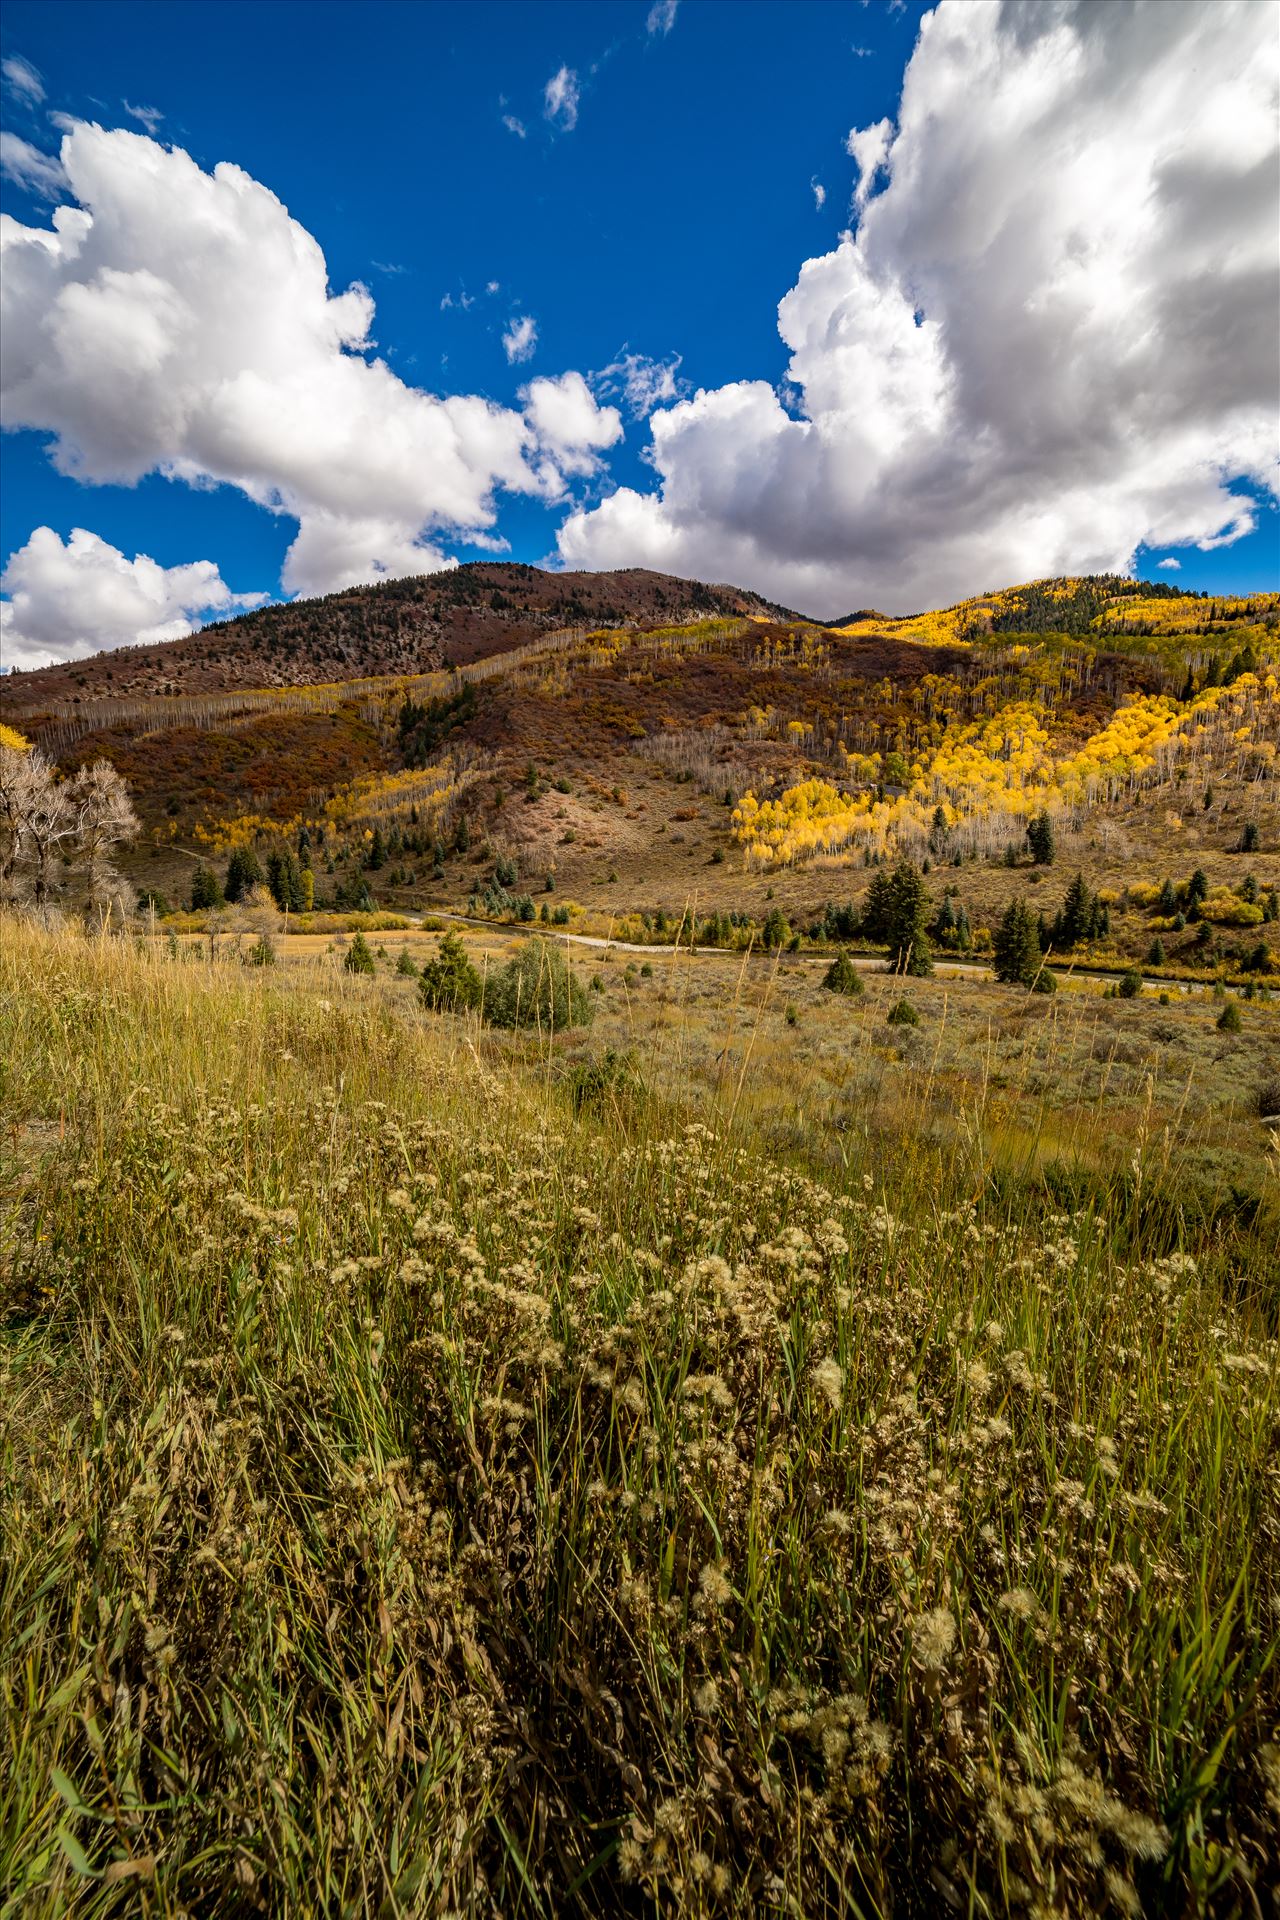 Fall in Aspen Snowmass Wilderness Area No 2 - Summer grasses give way to fall colors between Redstone and Marble, Colorado. by Scott Smith Photos